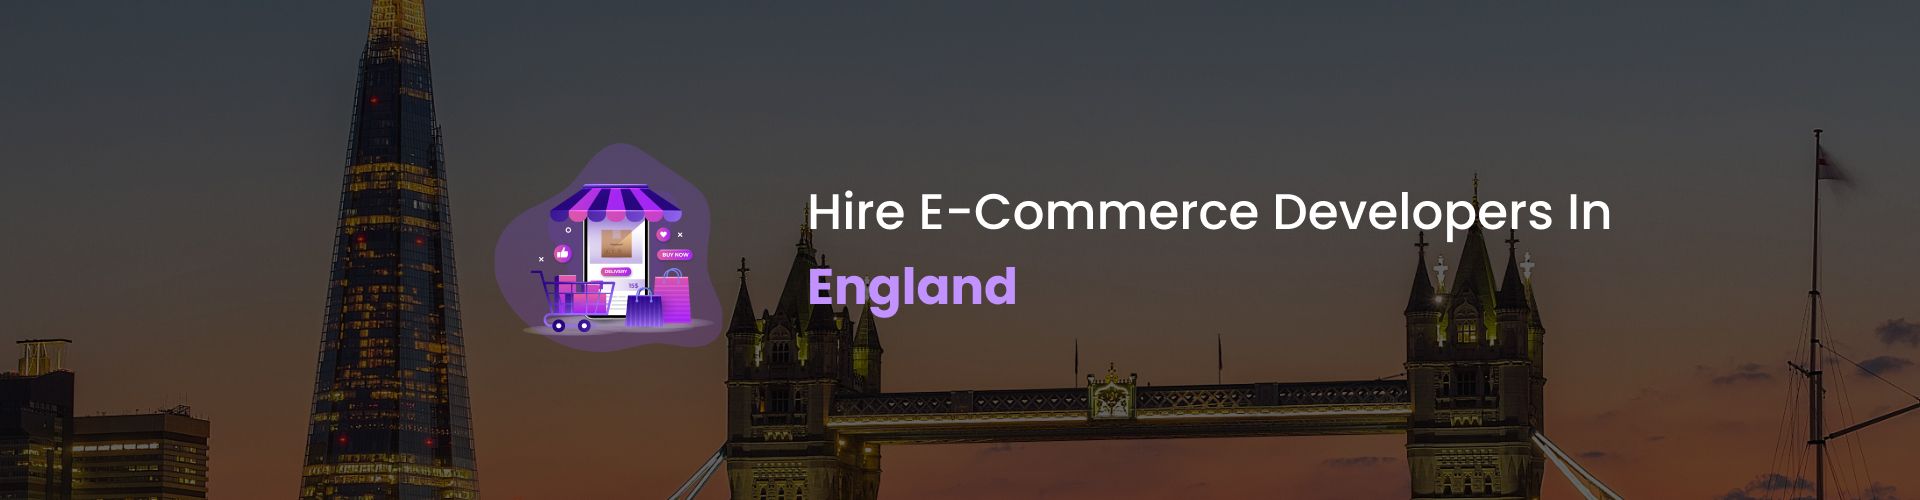 hire ecommerce developers in england